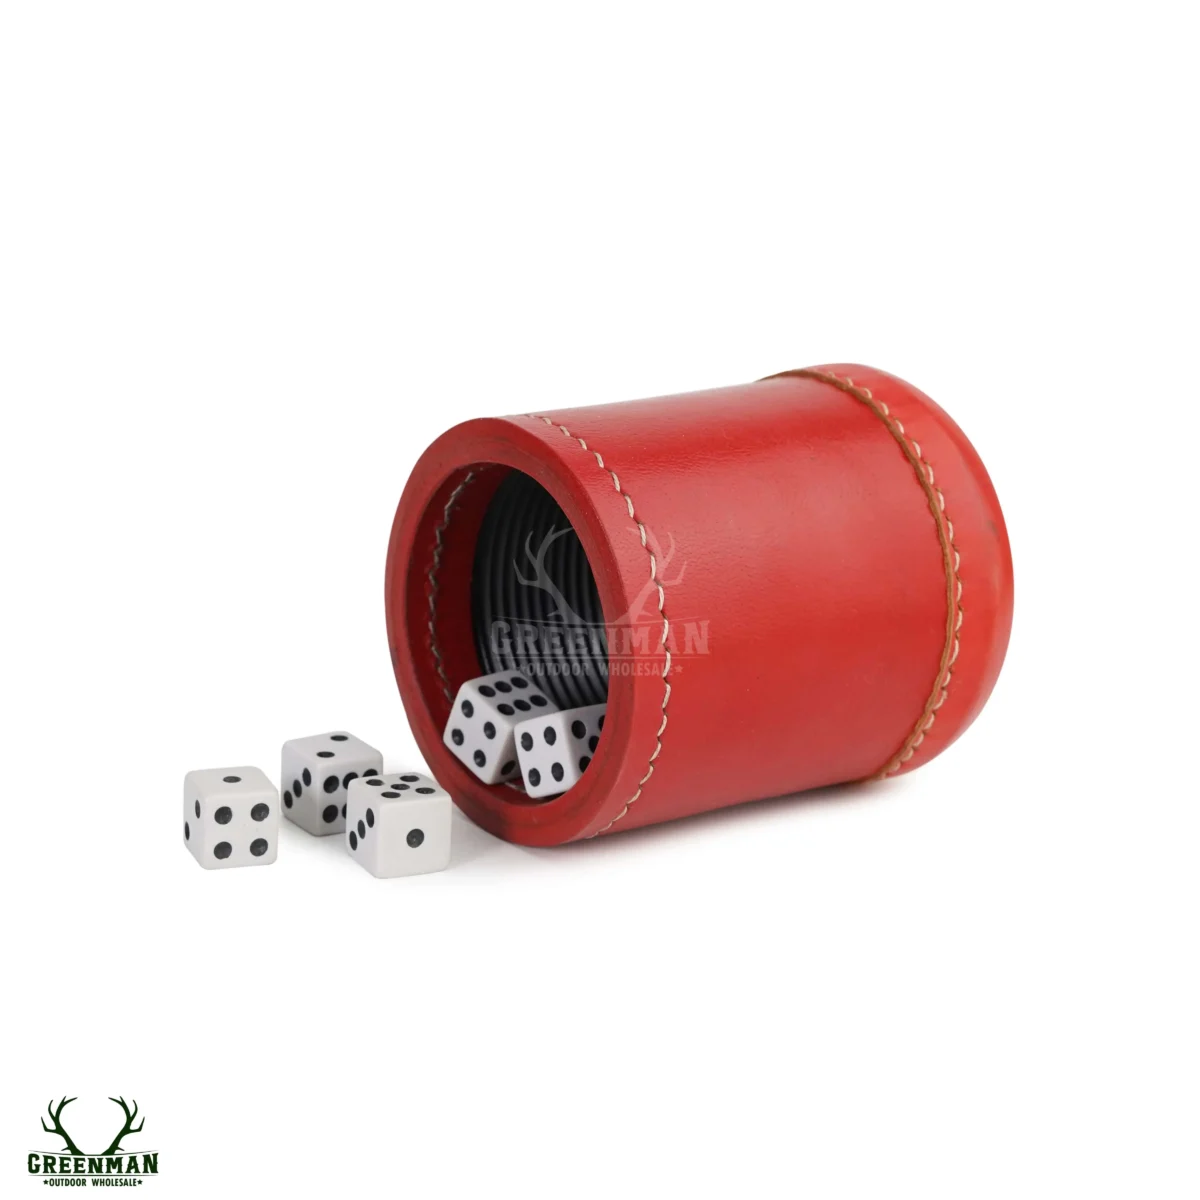 leather dice cup, red leather dice shaker, red leather dice cup